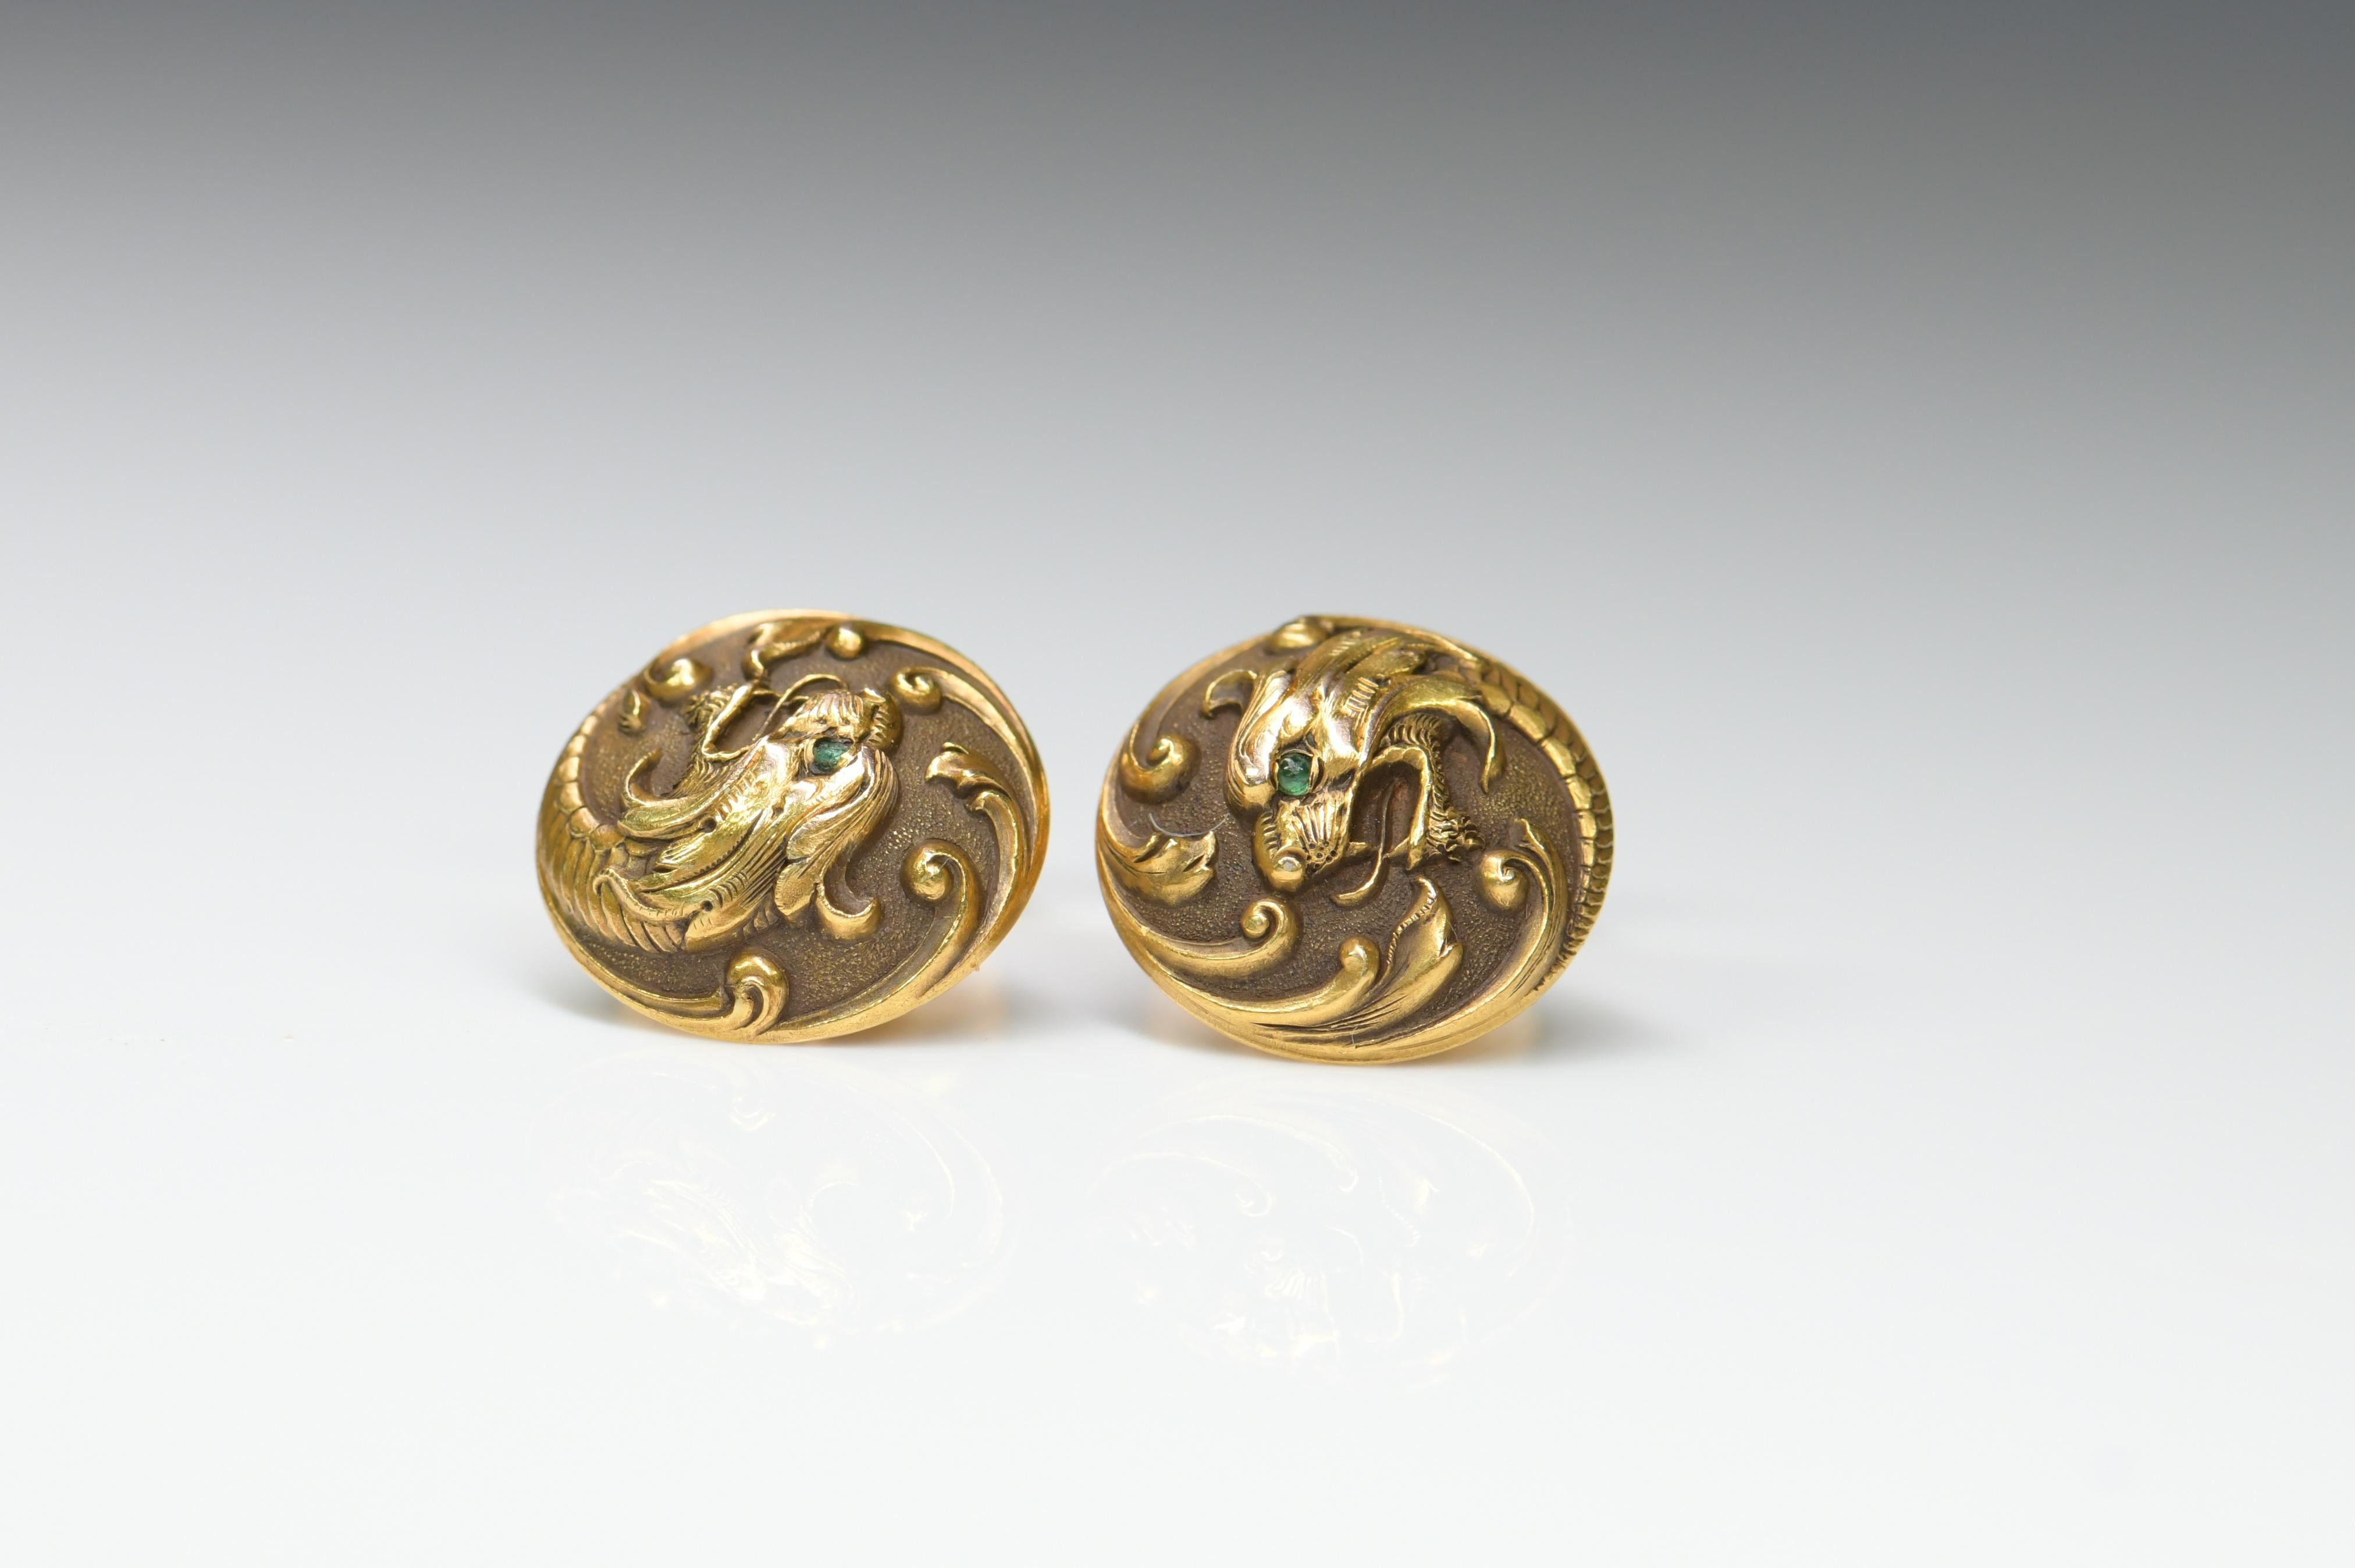 A rare pair of Art Nouveau 14ct gold cufflinks. The gold work is incredible fine. They are fine models of a dragon's head. His eyes are cabochon emerald. They were made in America circa 1910.

Perfect condition 
SKU: AT-0208
Weight: 9.7g
Size: 15mm